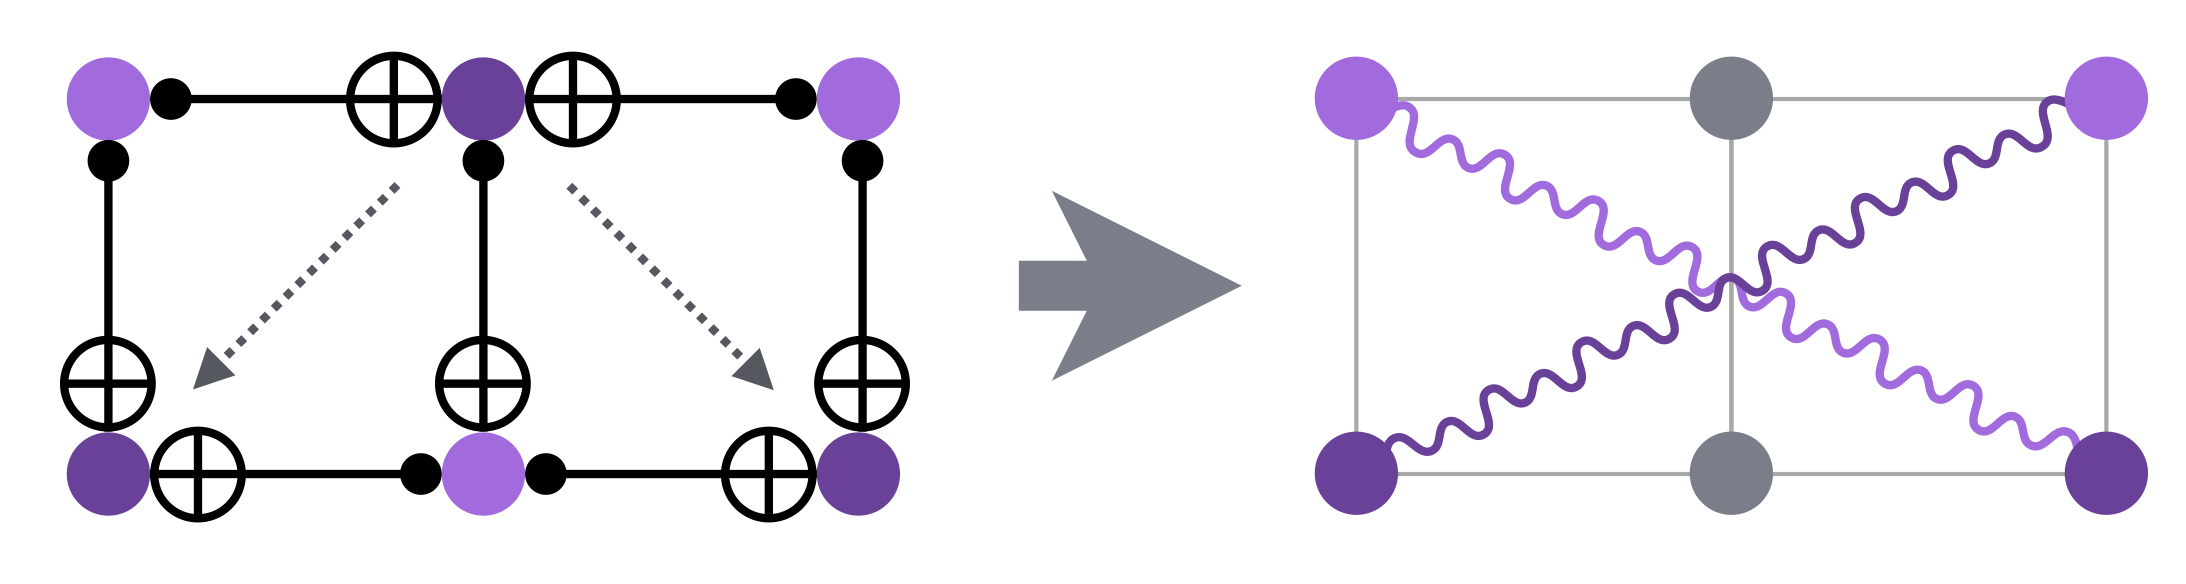 A sketch of how a 'QLNC circuit' realises entanglement swapping between two pairs of qubits in parallel.